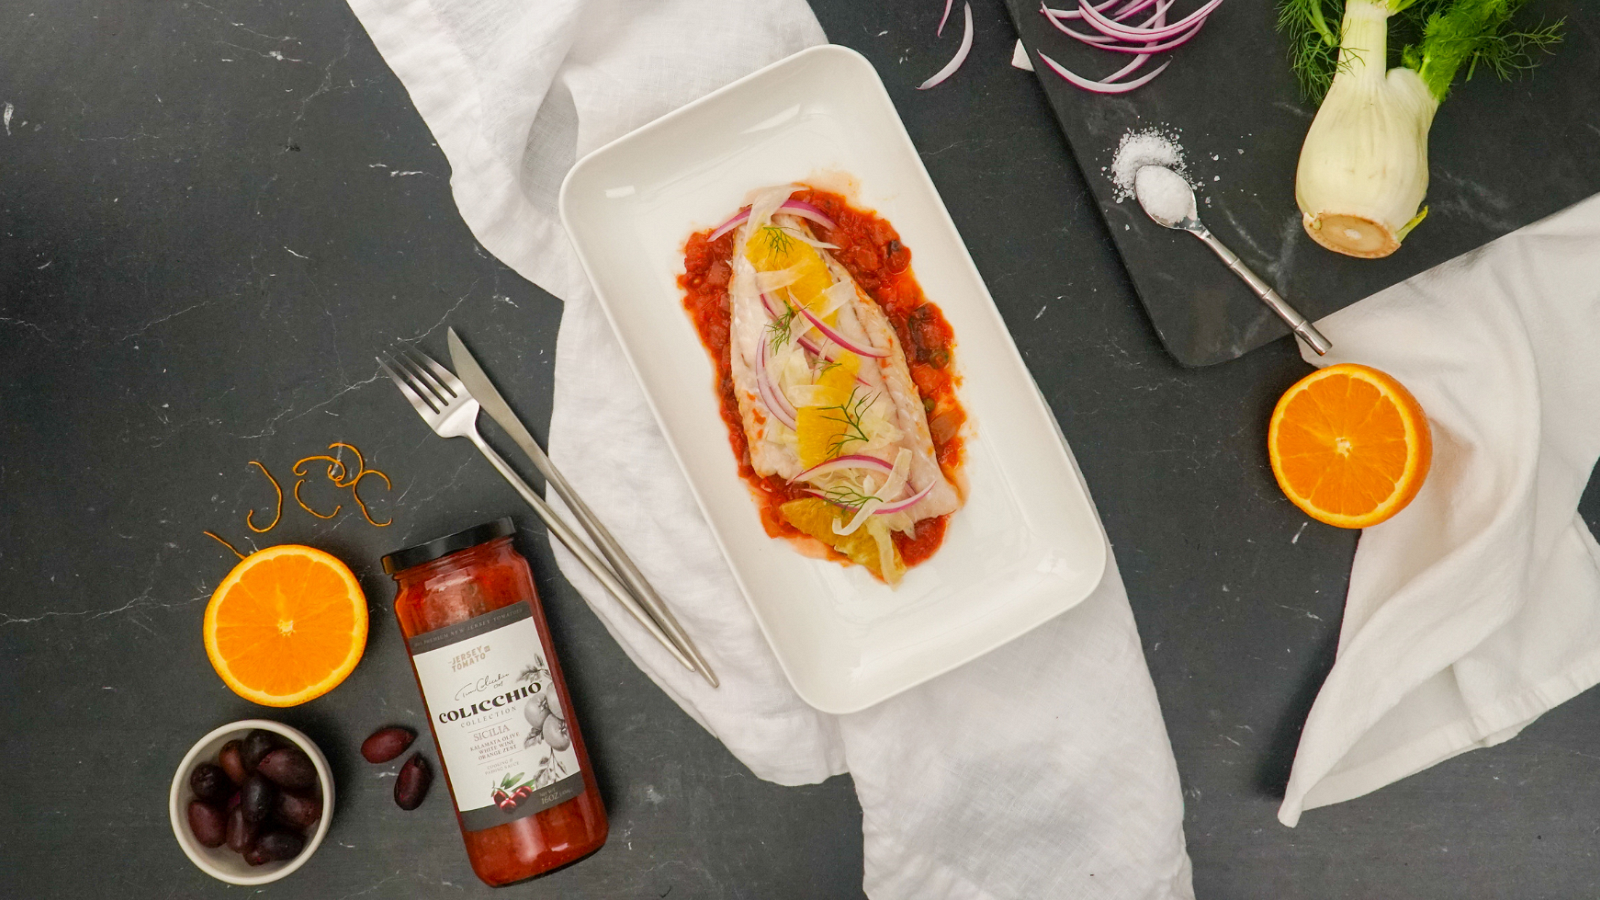 Image of Tomato Baked Sea Bass with Fennel & Orange Salad